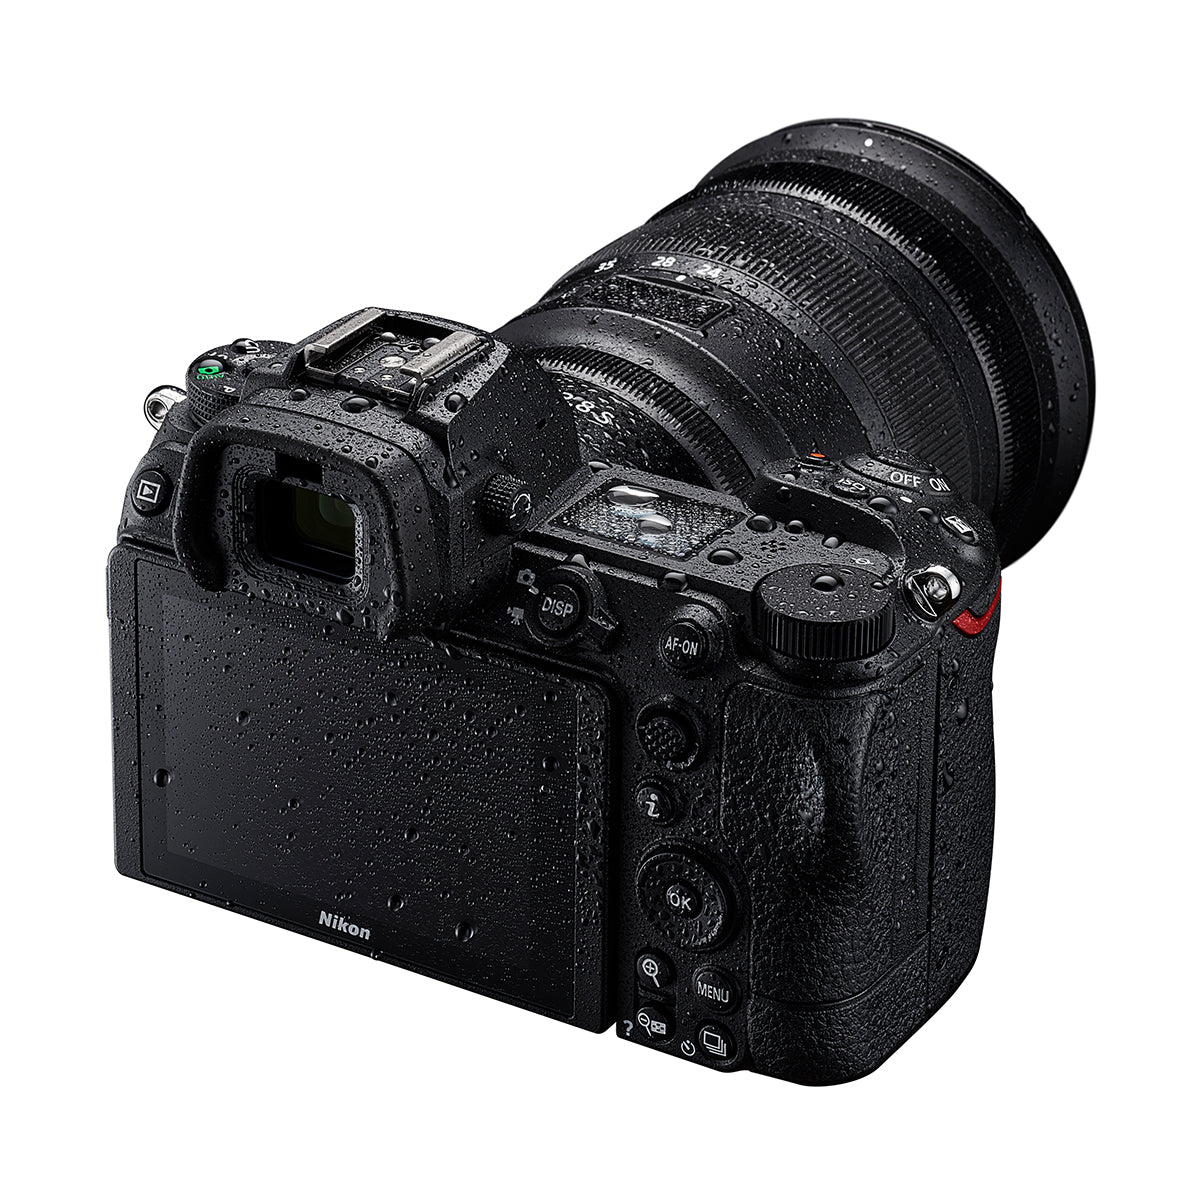 Nikon Z7 II Review - Handling and Feature Set